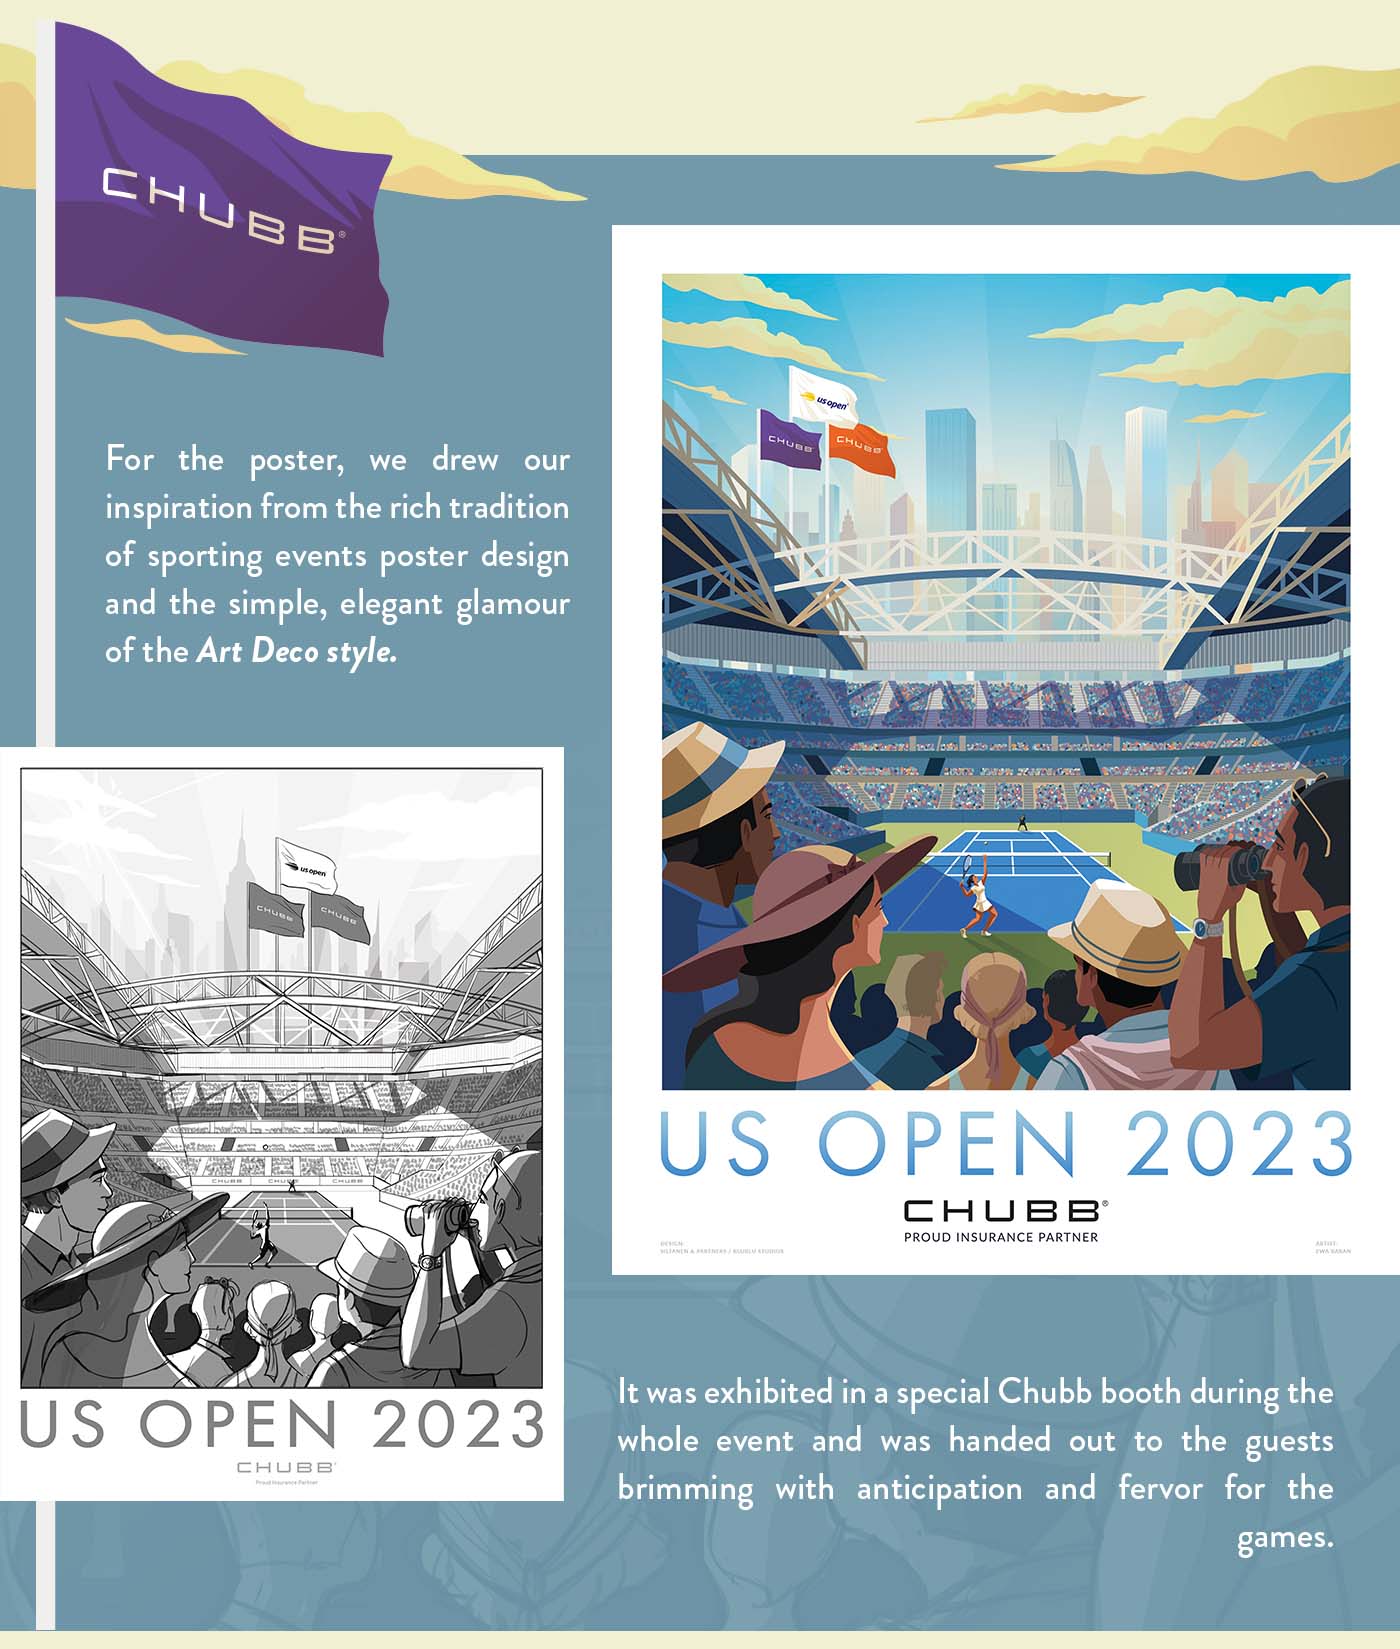 Chubb - US Open 2023 - about poster